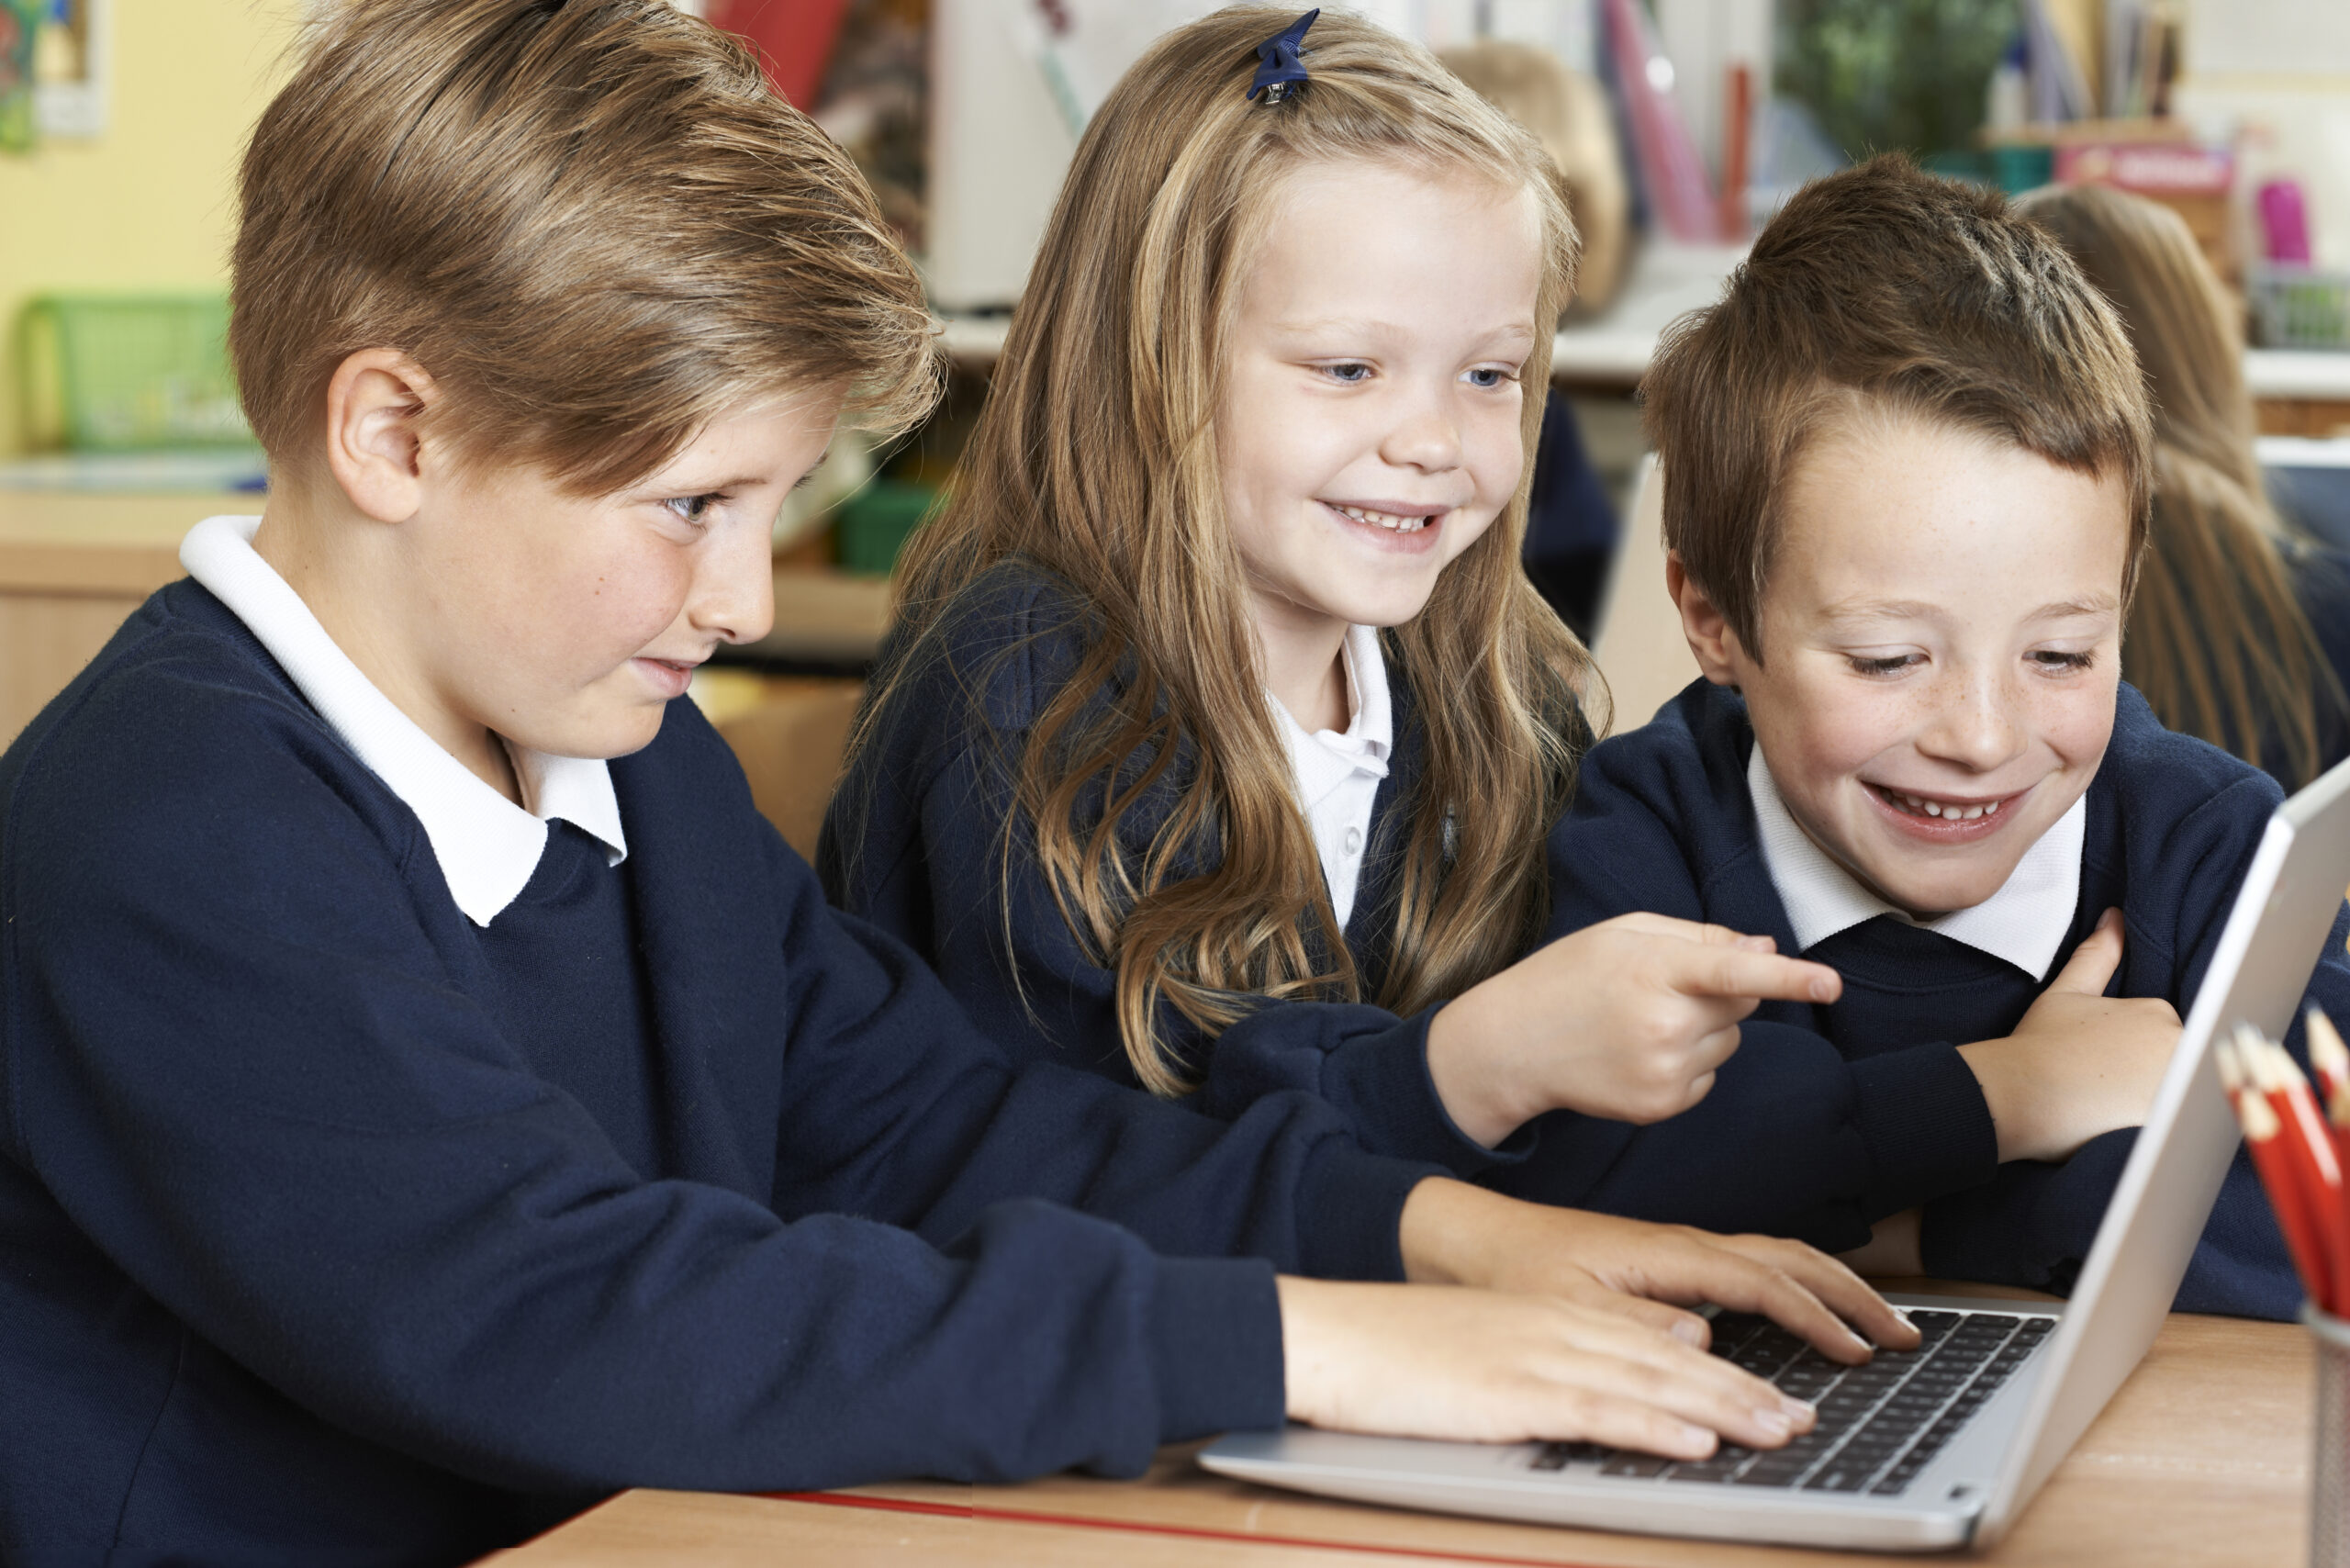 two young boys and a girl in school uniforms on a laptop